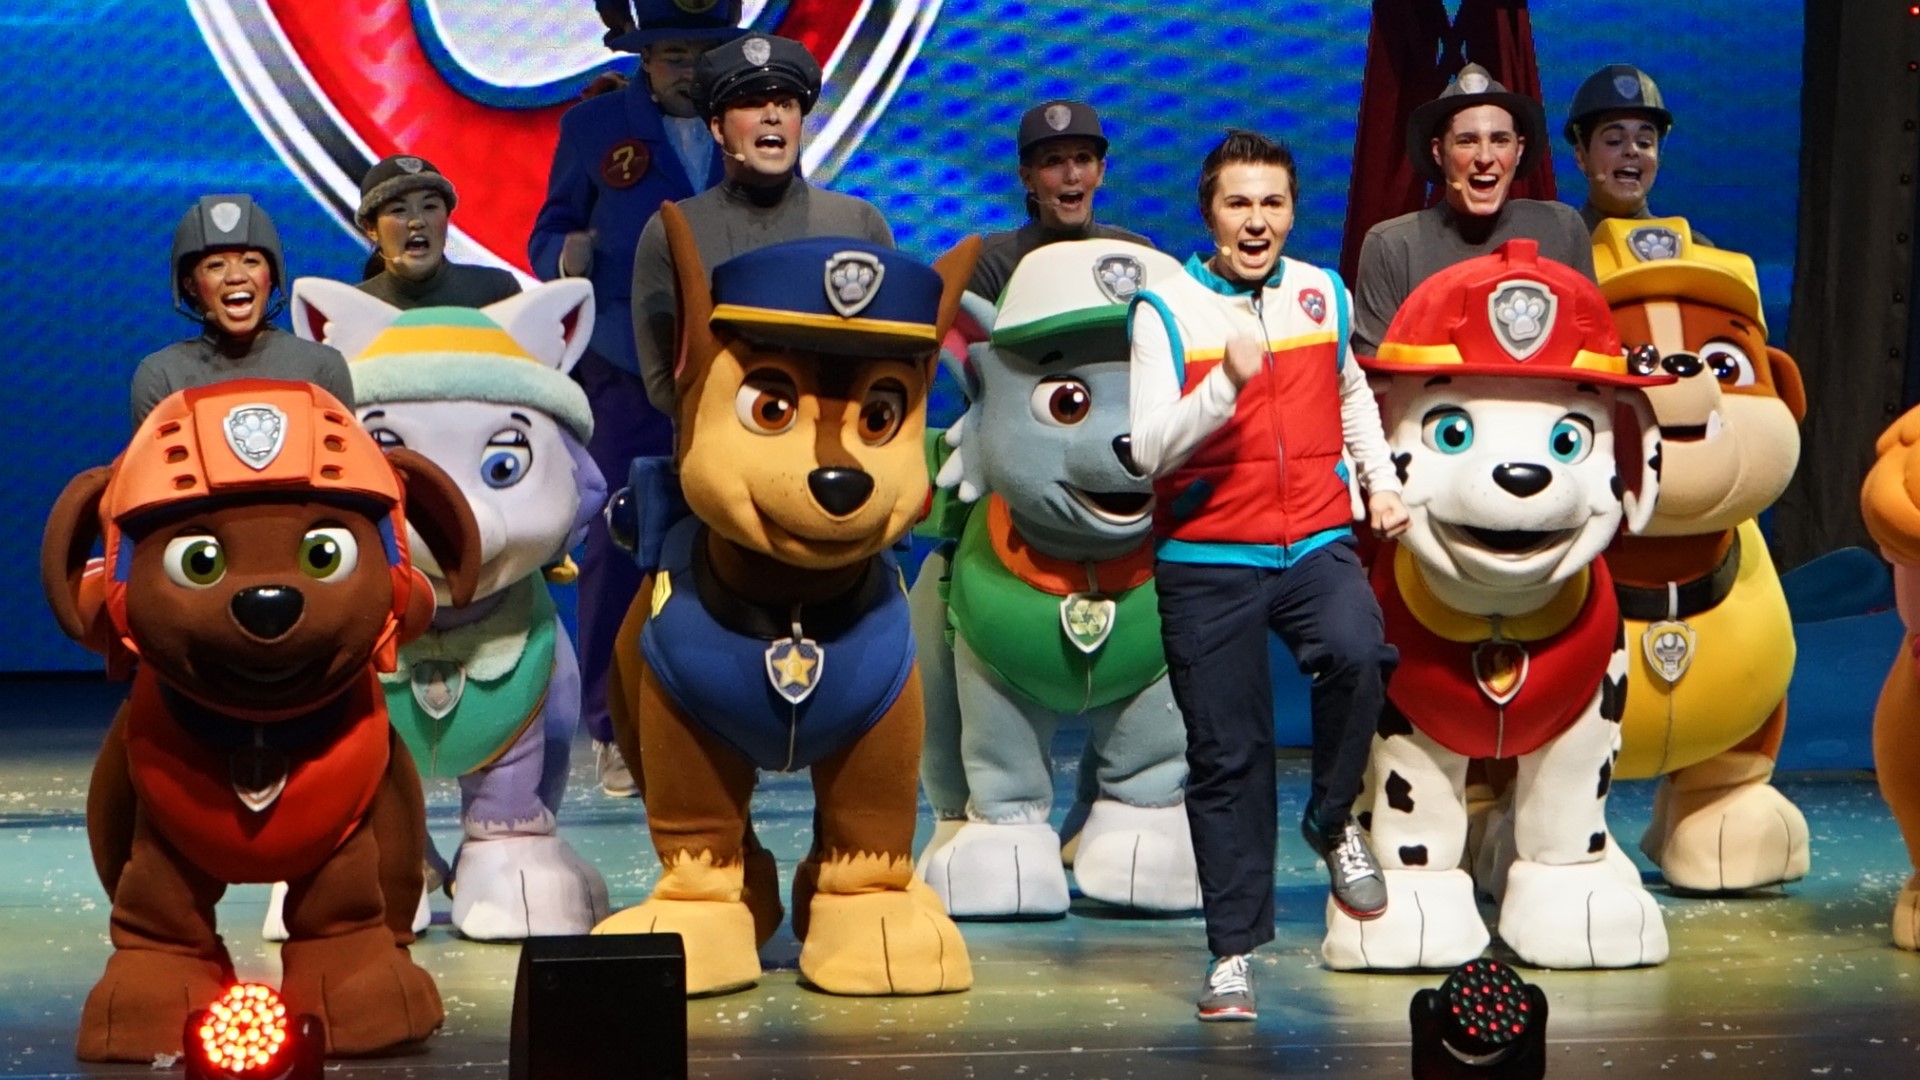 PAW Patrol hitting the road for live Great Pirate tour into 2023